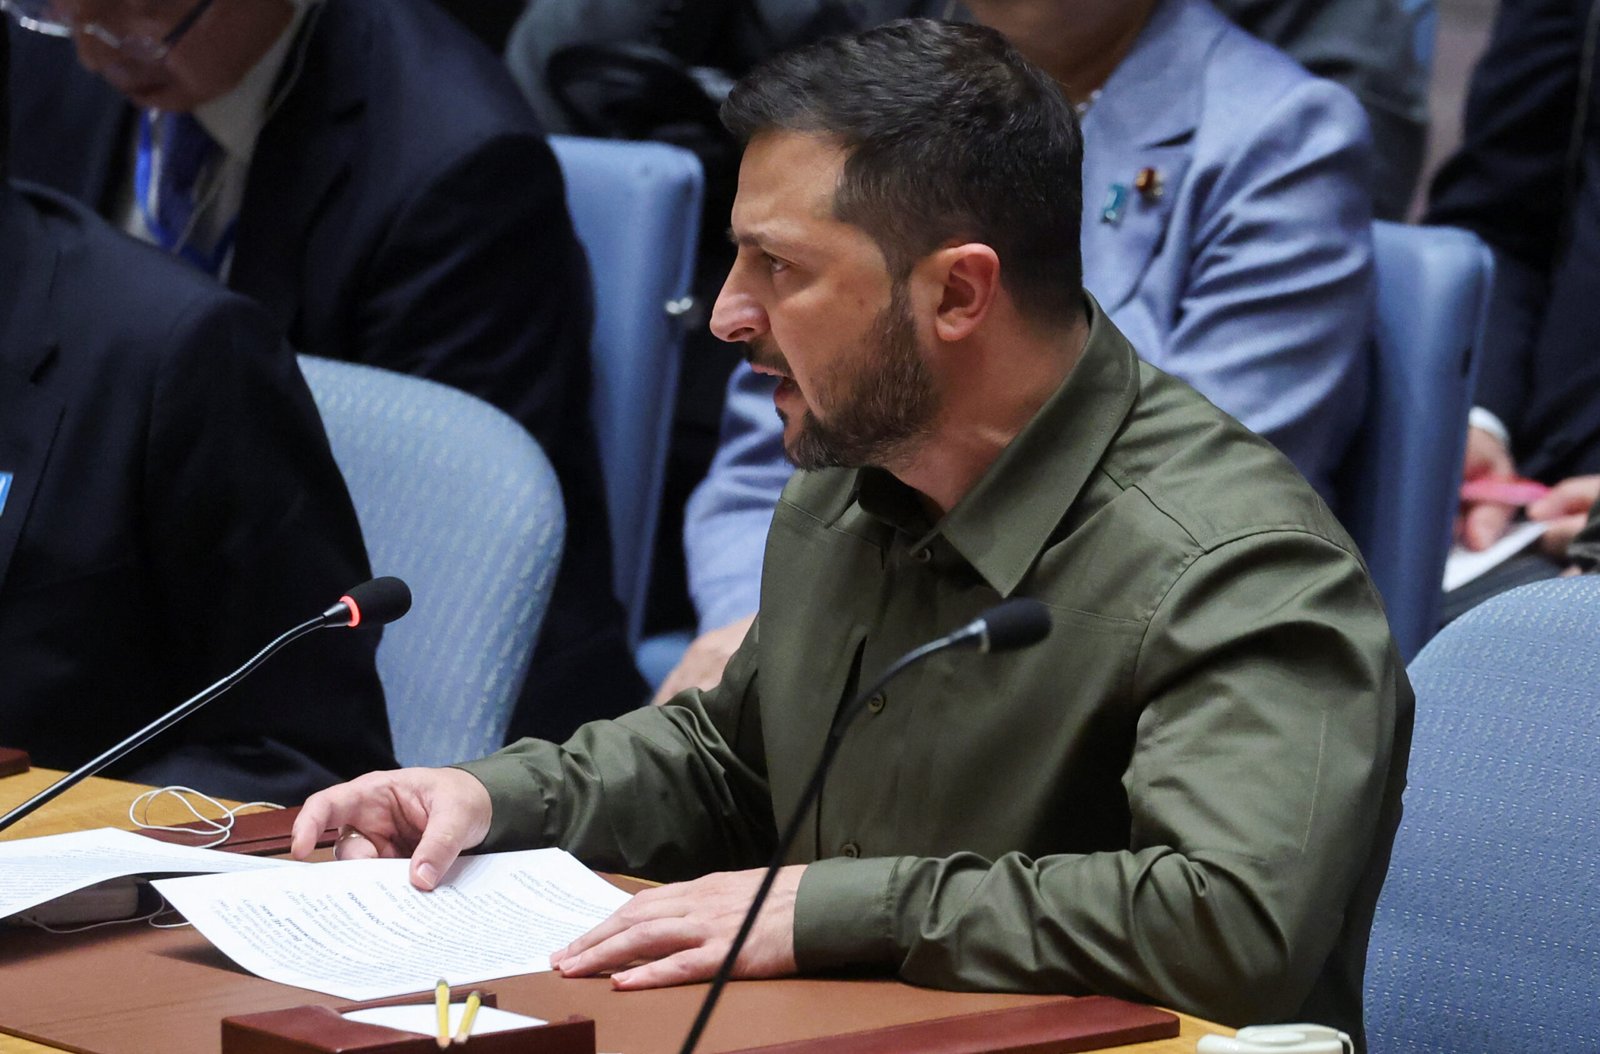 ‘stop-the-war’-and-zelenskiy-need-not-speak,-un-security-council-chair-tells-russia